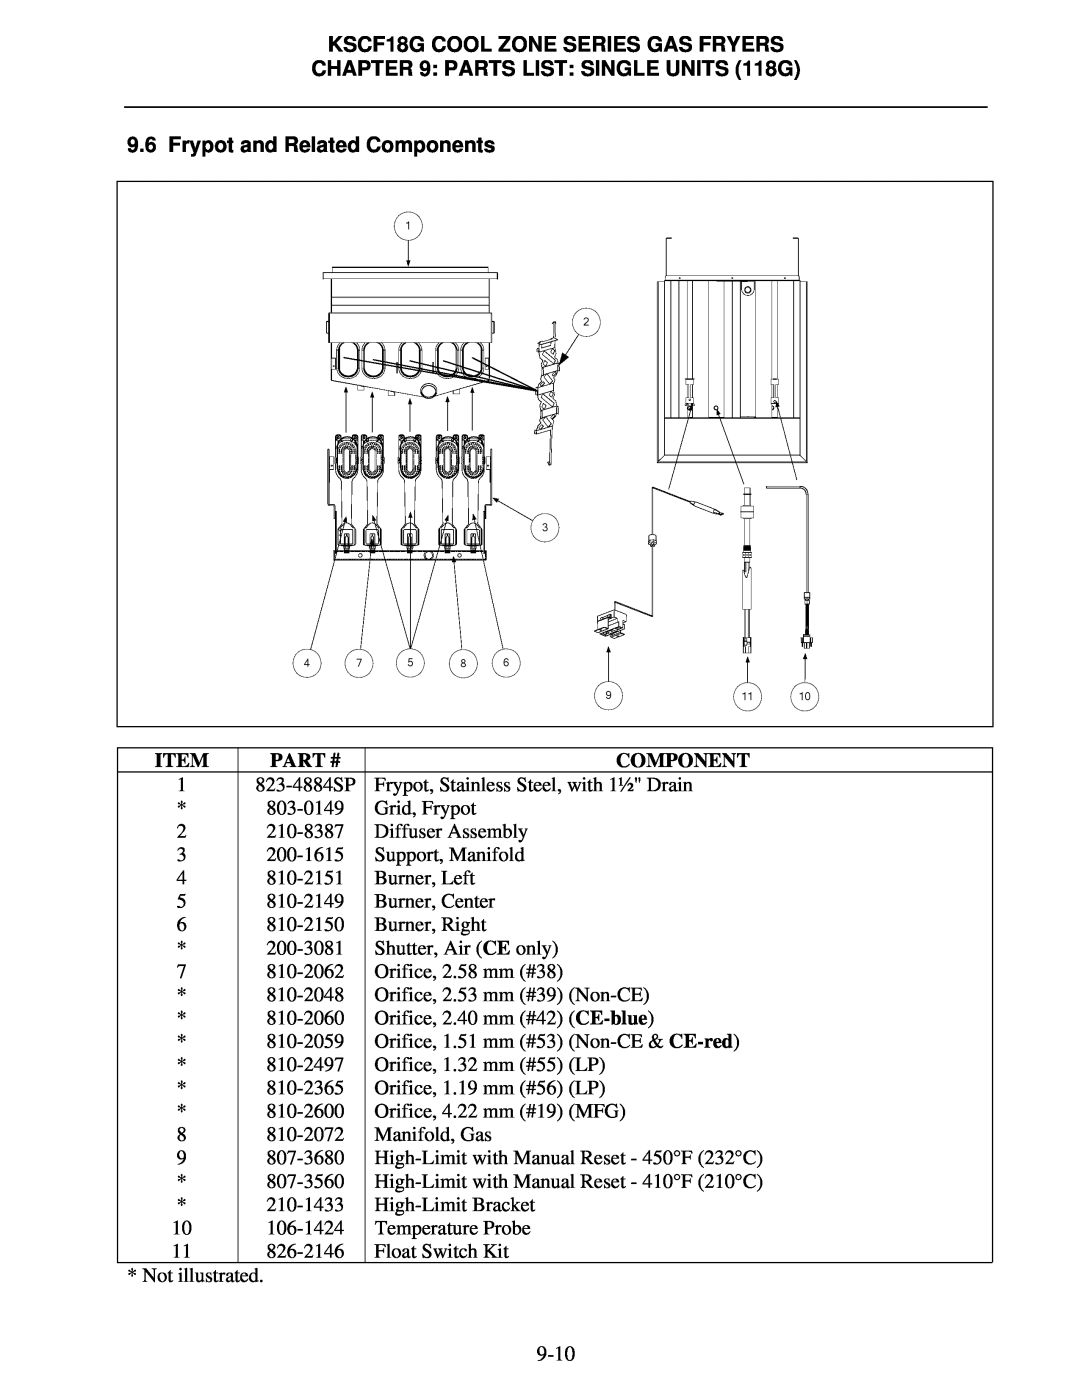 Frymaster manual Frypot and Related Components, KSCF18G COOL ZONE SERIES GAS FRYERS, PARTS LIST: SINGLE UNITS 118G, Item 